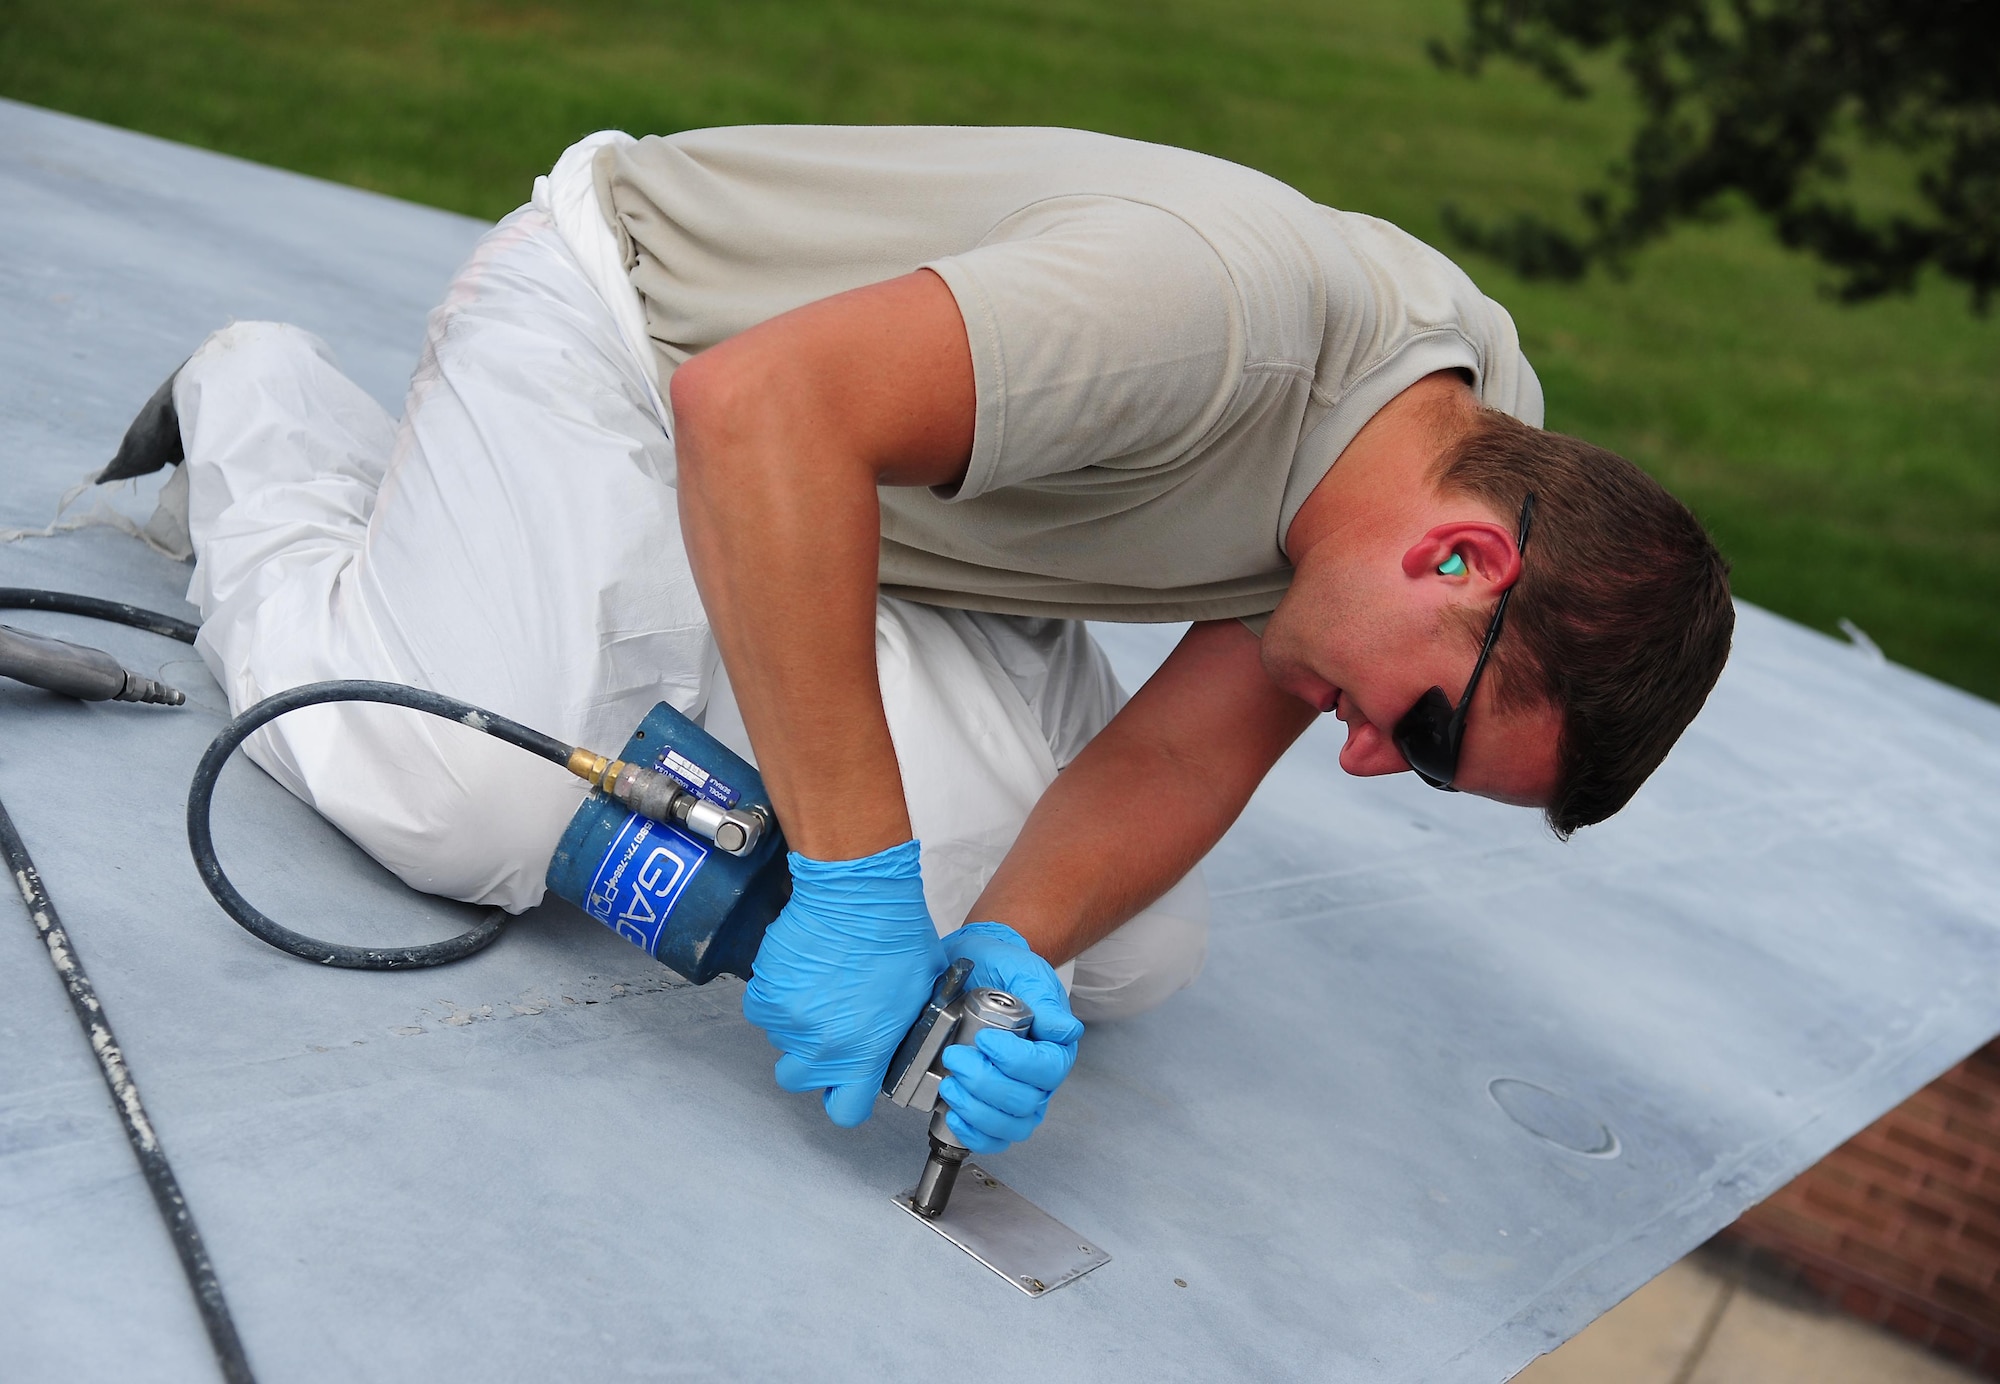 Tech Sgt. Nicholas Fonzo, a low observable technician from the 509th Maintenance Squadron, repairs corrosion damage on an FB-111A General Dynamics Aardvark static display at Whiteman Air Force Base, Mo., Sept. 13, 2016. The static displays on base require maintenance due to weather and wildlife as needed.(U.S. Air Force photo by Senior Airman Joel Pfiester)